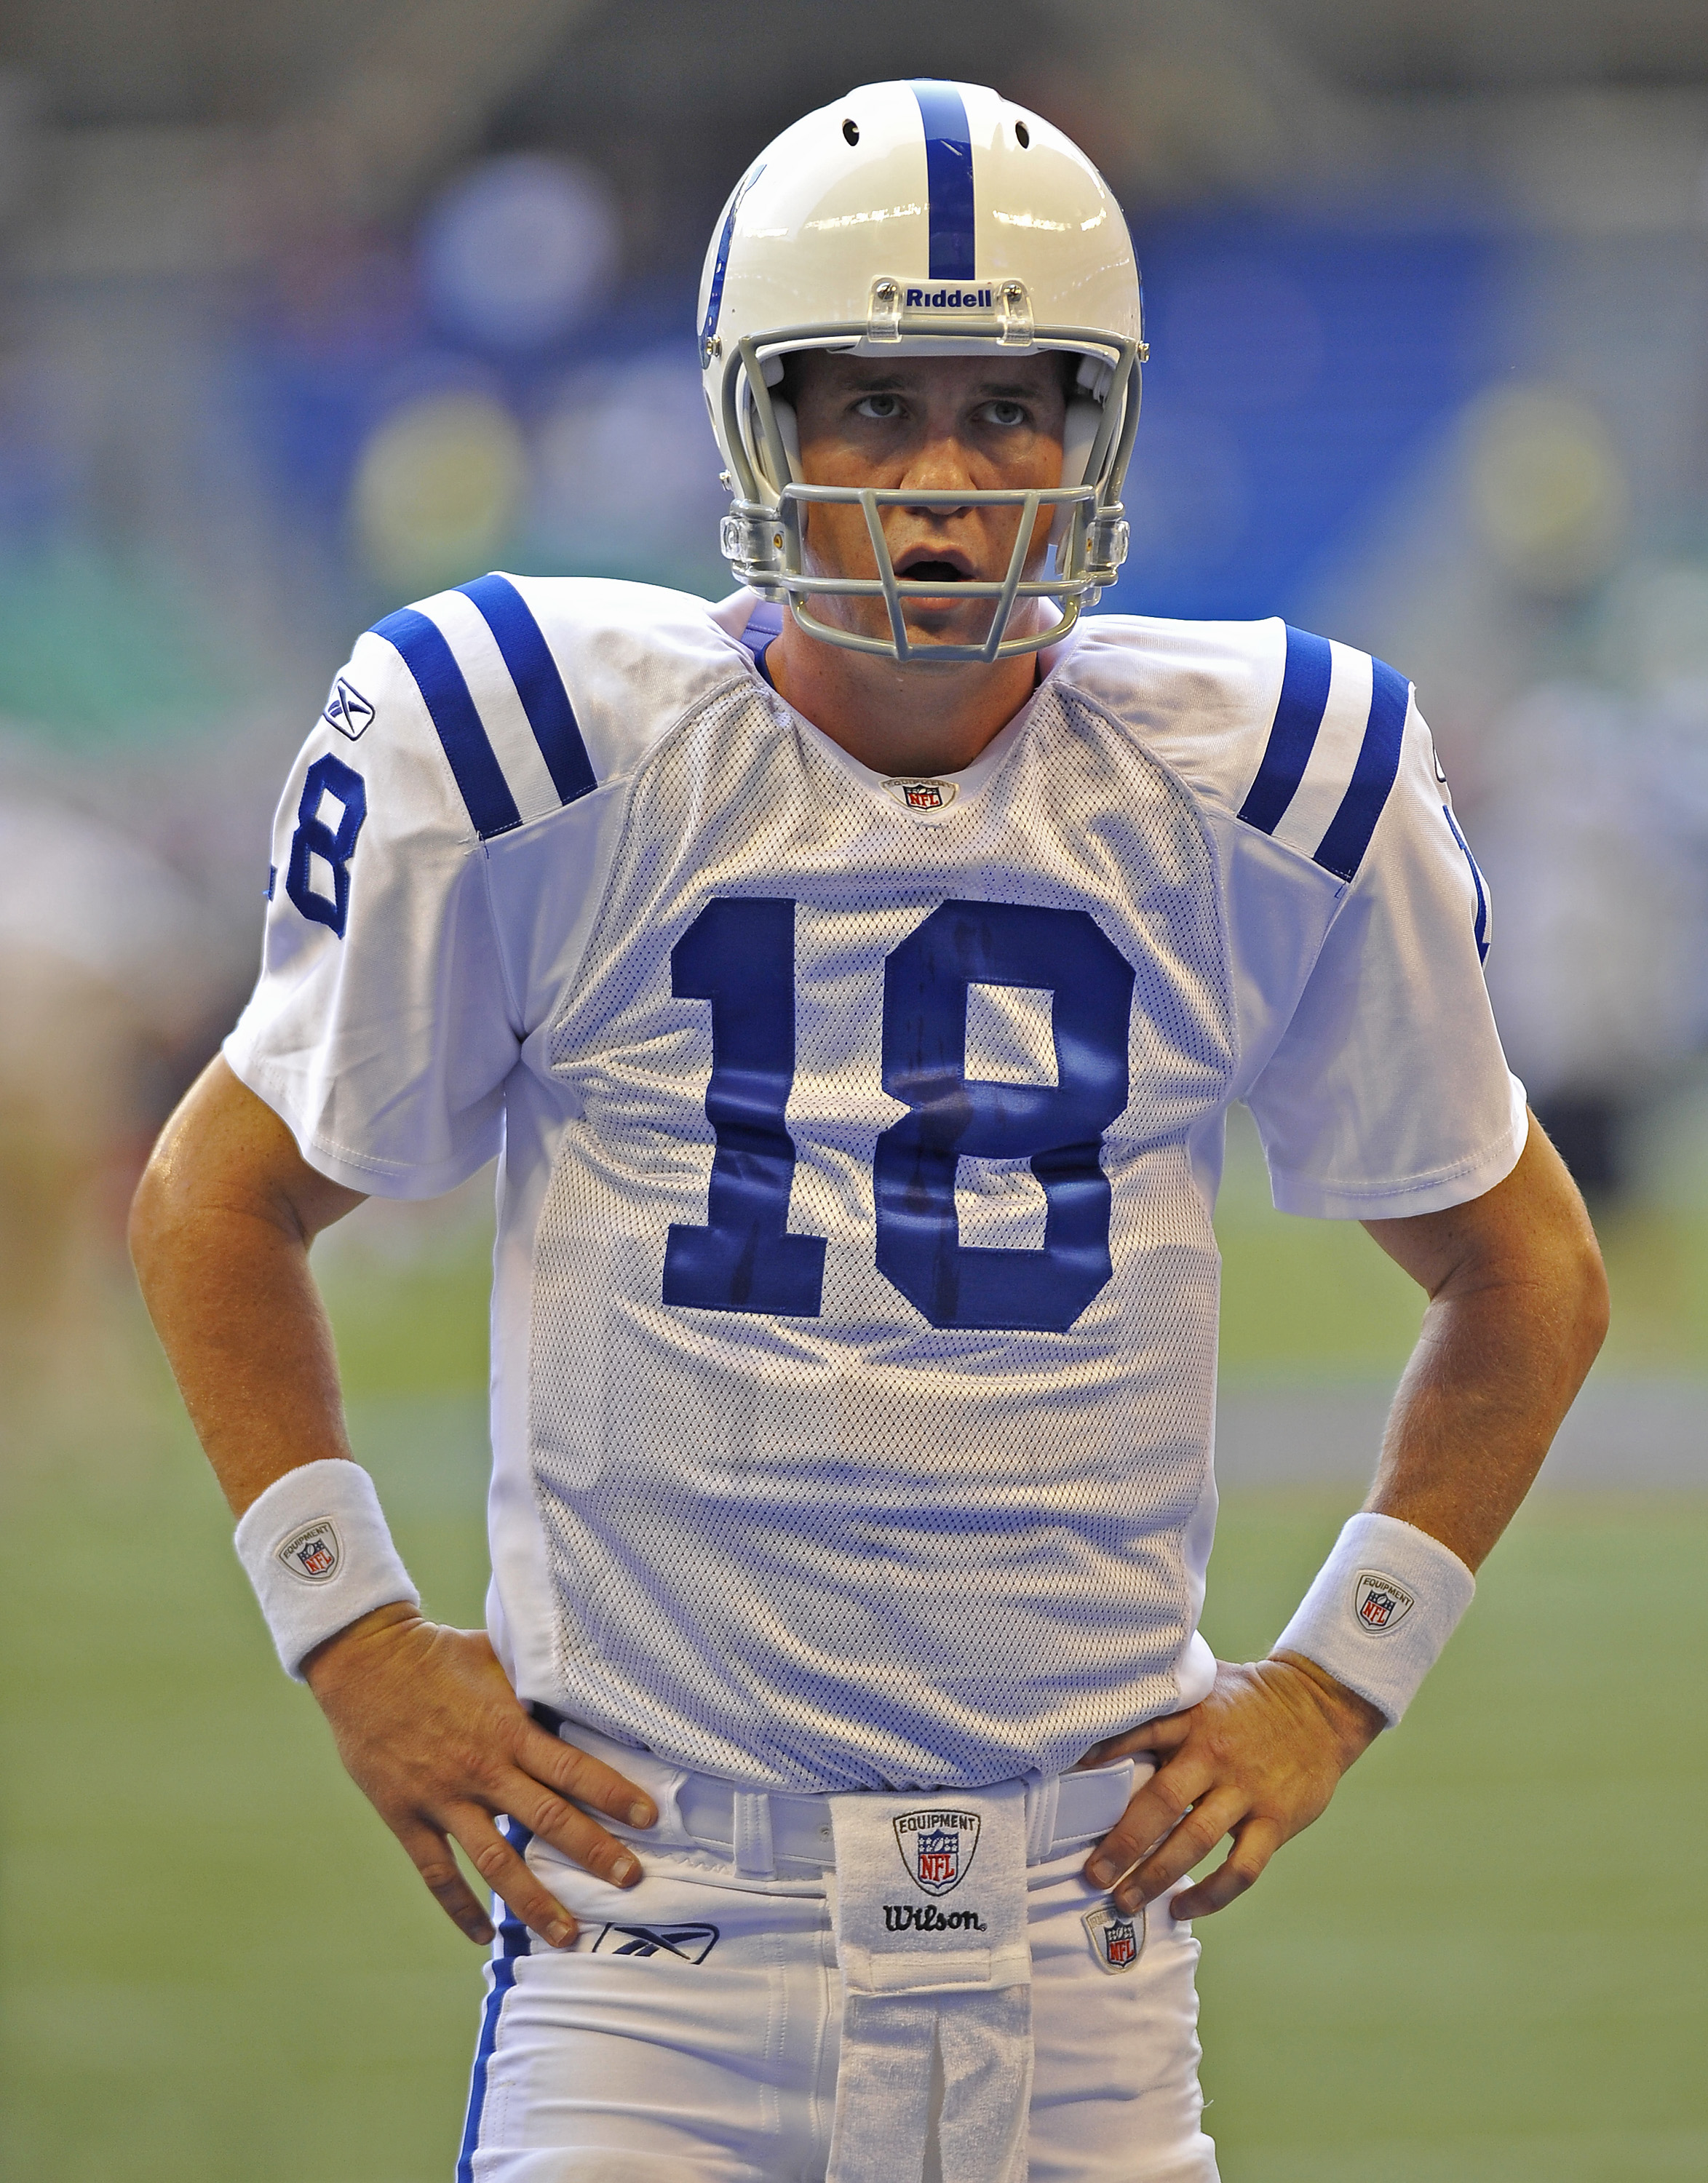 TORONTO, CANADA - AUGUST 19: Peyton Manning #18 of the Indianapolis Colts looks on prior to game action against of the Buffalo Bills on August 19, 2010 at the Rogers Centre in Toronto, Ontario, Canada. (Photo by Brad White/Getty Images)